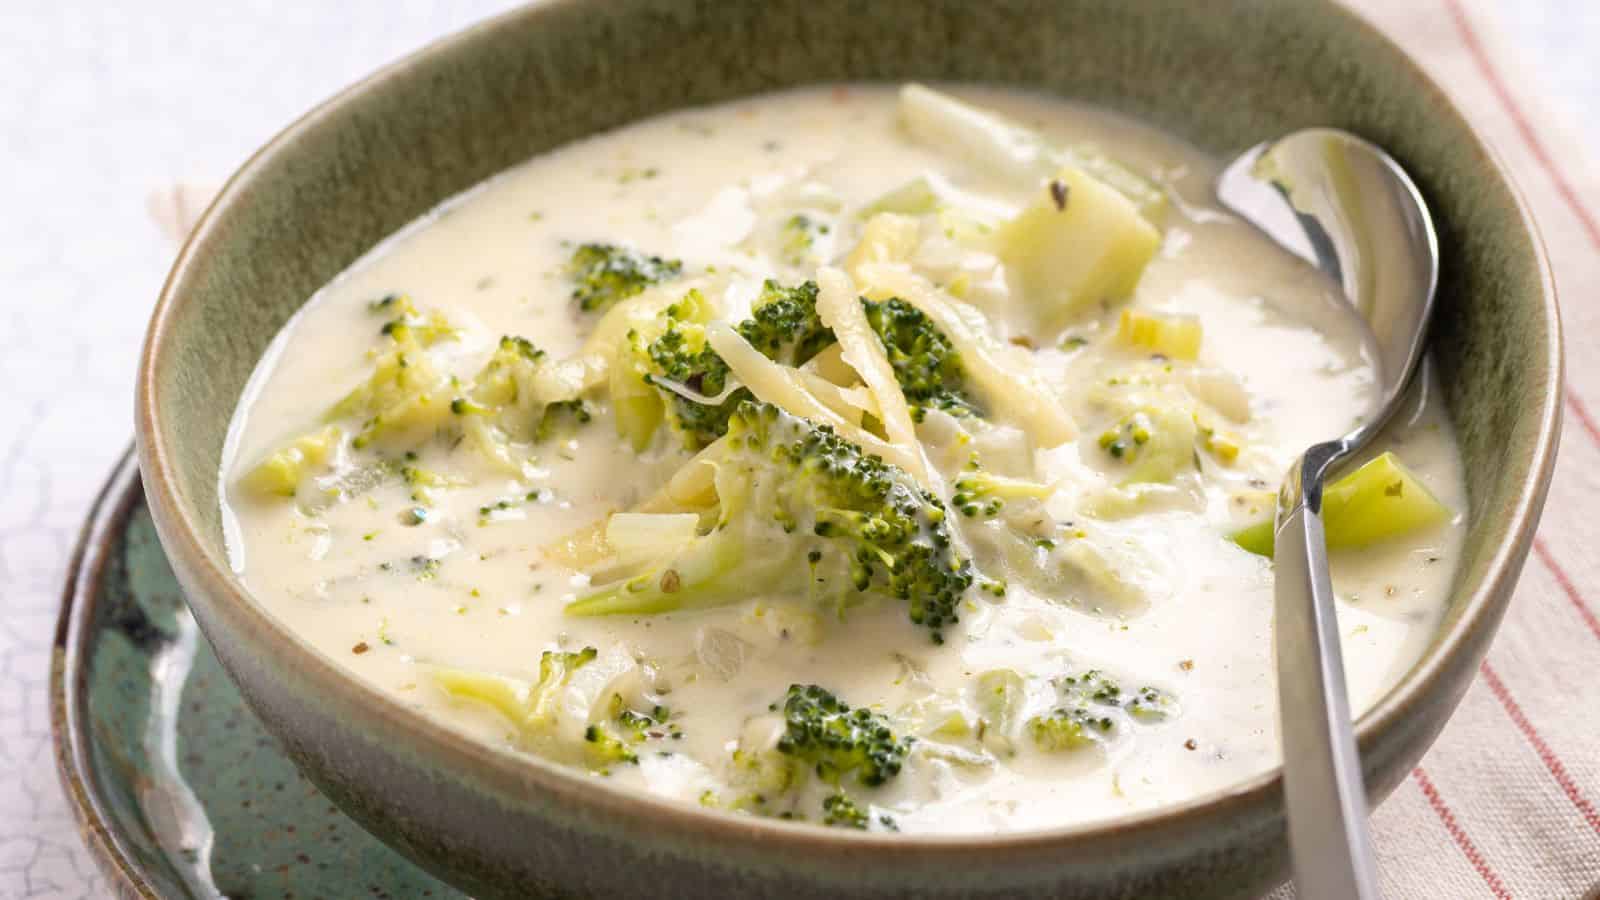 A bowl of creamy broccoli cheese soup beside fresh broccoli and shredded cheese, with a slow cooker in the background.